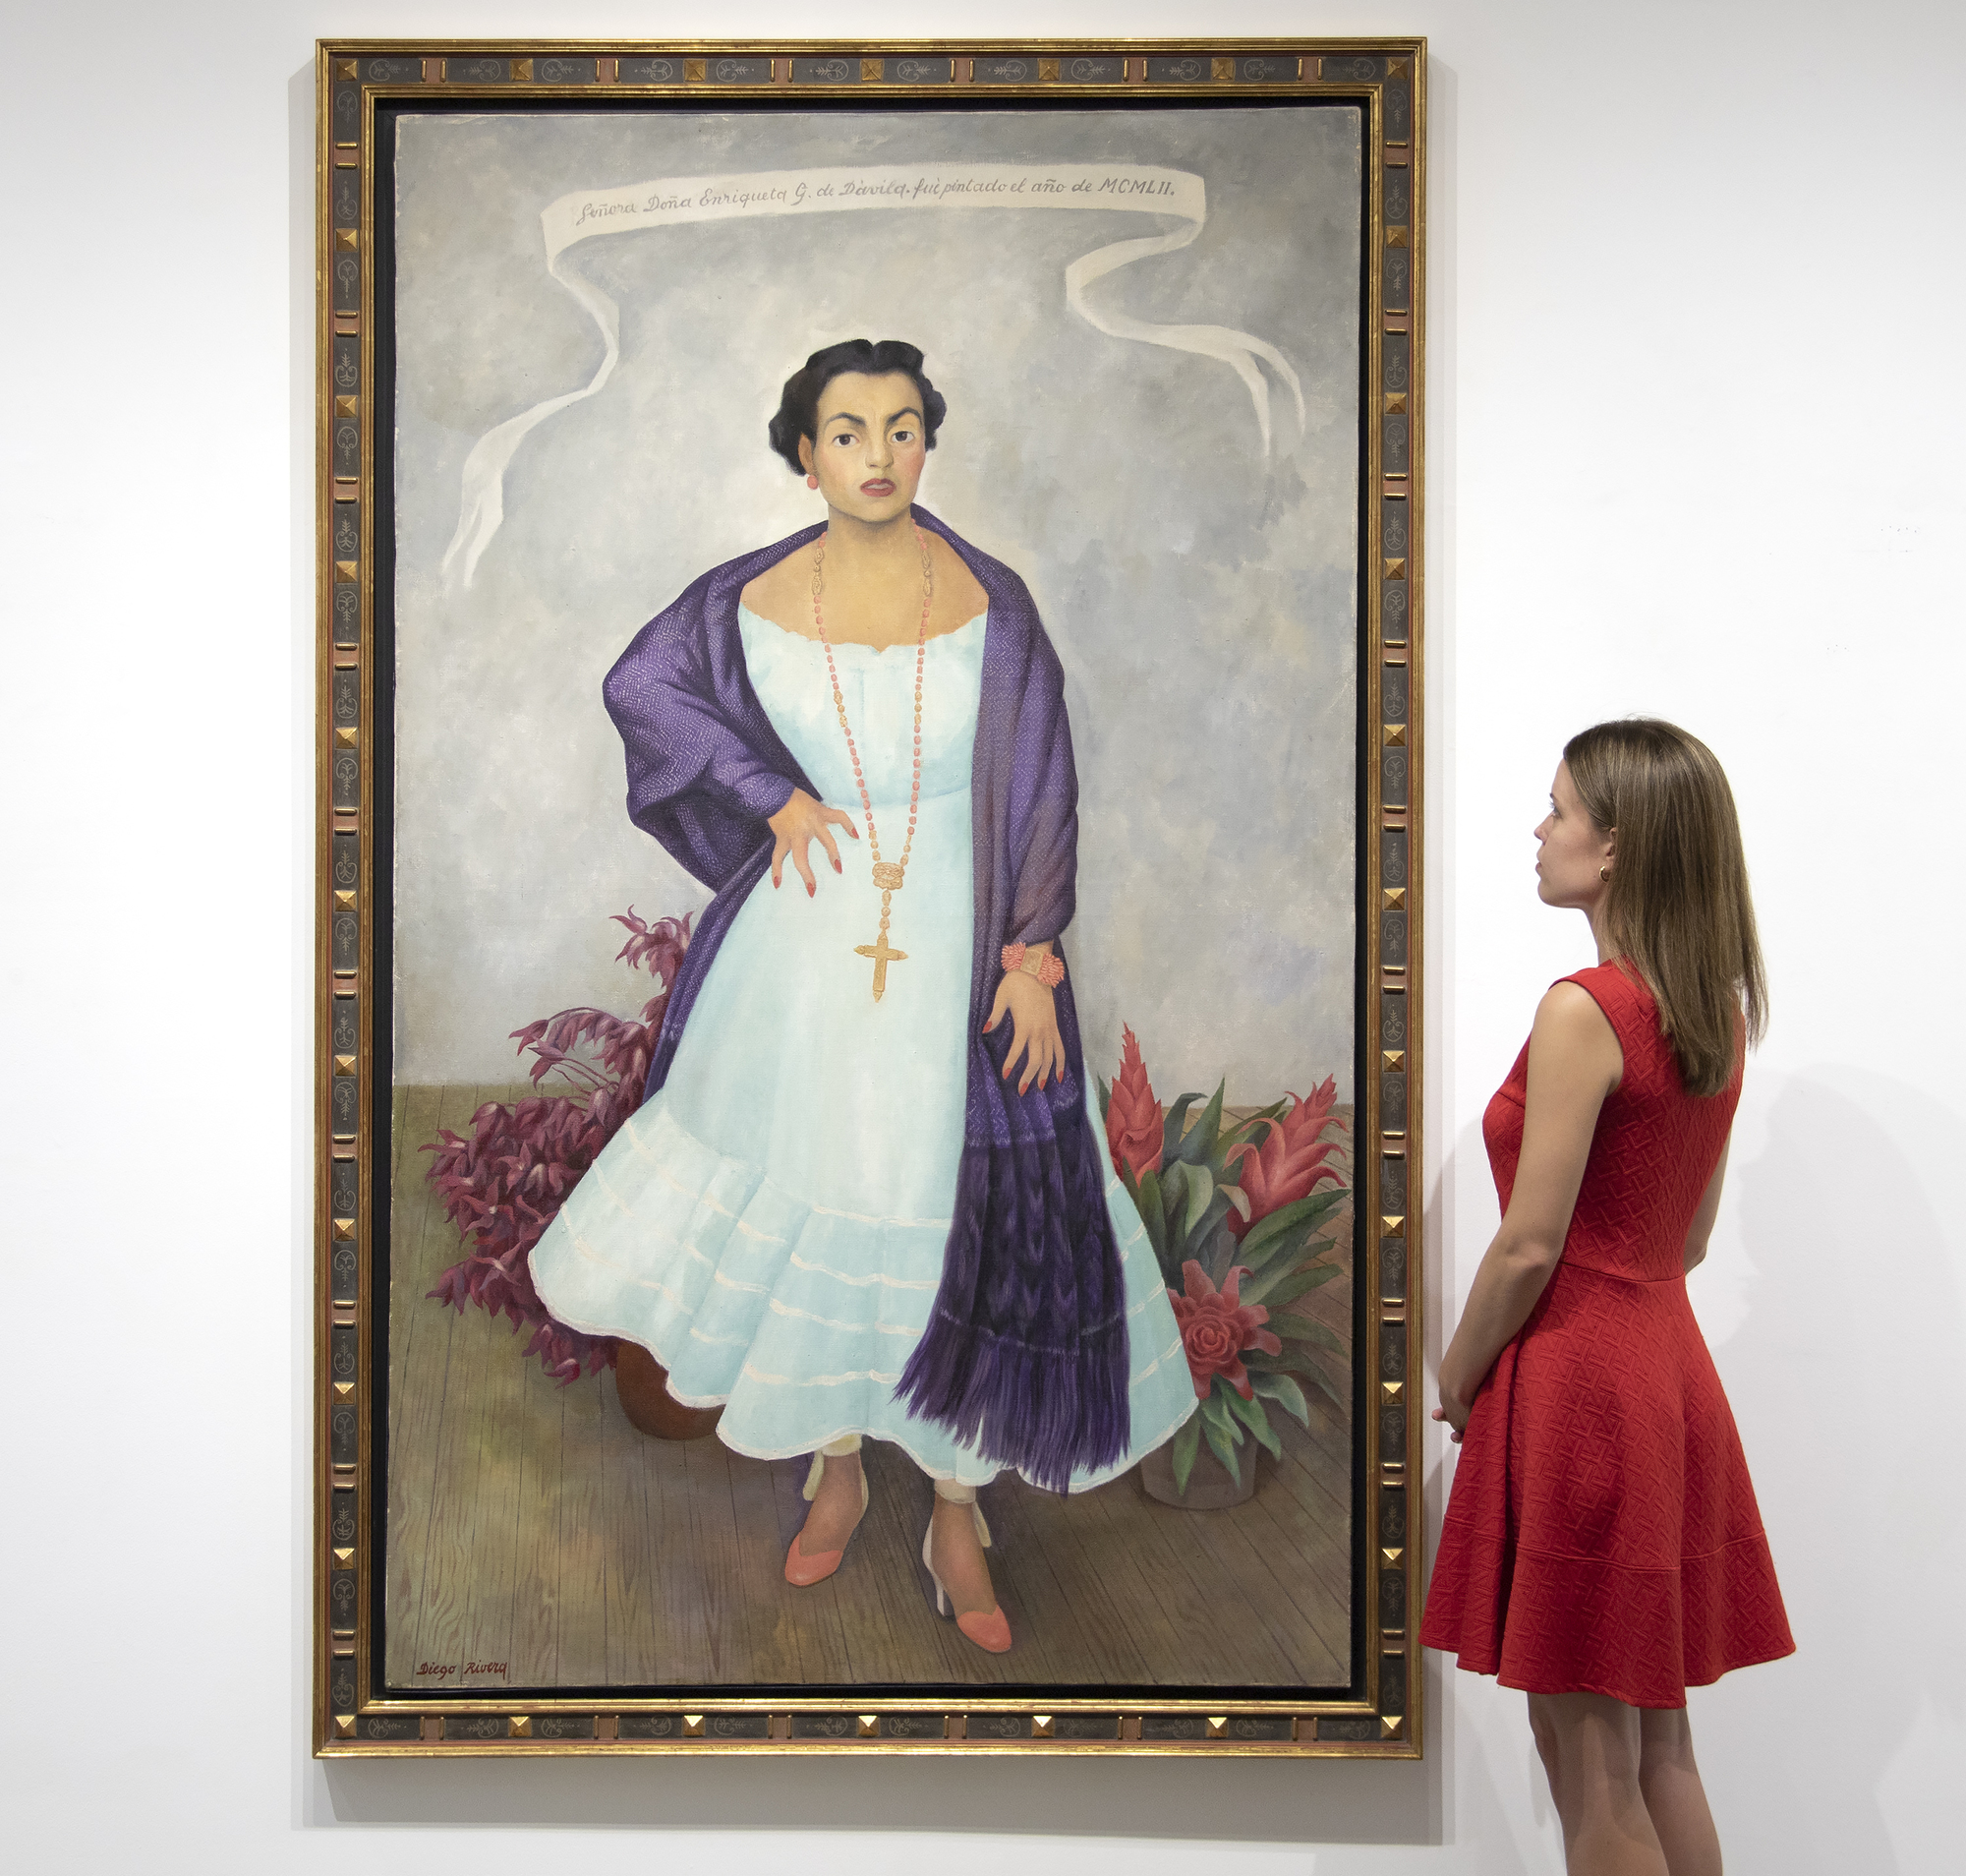 &lt;br&gt;In Diego Rivera’s portrait of Enriqueta Dávila, the artist asserts a Mexicanidad, a quality of Mexican-ness, in the work along with his strong feelings towards the sitter. Moreover, this painting is unique amongst his portraiture in its use of symbolism, giving us a strong if opaque picture of the relationship between artist and sitter.&lt;br&gt;&lt;br&gt;Enriqueta, a descendent of the prominent Goldbaum family, was married to the theater entrepreneur, José María Dávila. The two were close friends with Rivera, and the artist initially requested to paint Enriqueta’s portrait. Enriqueta found the request unconventional and relented on the condition that Rivera paints her daughter, Enriqueta “Quetita”. Rivera captures the spirit of the mother through the use of duality in different sections of the painting, from the floorboards to her hands, and even the flowers. Why the split in the horizon of the floorboard? Why the prominent cross while Enriqueta’s family is Jewish? Even her pose is interesting, showcasing a woman in control of her own power, highlighted by her hand on her hip which Rivera referred to as a claw, further complicating our understanding of her stature.&lt;br&gt;&lt;br&gt;This use of flowers, along with her “rebozo” or shawl, asserts a Mexican identity. Rivera was adept at including and centering flowers in his works which became a kind of signature device. The flowers show bromeliads and roselles; the former is epiphytic and the latter known as flor de jamaica and often used in hibiscus tea and aguas frescas. There is a tension then between these two flowers, emphasizing the complicated relationship between Enriqueta and Rivera. On the one hand, Rivera demonstrates both his and the sitter’s Mexican identity despite the foreign root of Enriqueta’s family but there may be more pointed meaning revealing Rivera’s feelings to the subject. The flowers, as they often do in still life paintings, may also refer to the fleeting nature of life and beauty. The portrait for her daughter shares some similarities from the use of shawl and flowers, but through simple changes in gestures and type and placement of flowers, Rivera illuminates a stronger personality in Enriqueta and a more dynamic relationship as filtered through his lens.&lt;br&gt;&lt;br&gt;A closer examination of even her clothing reveals profound meaning. Instead of a dress more in line for a socialite, Rivera has Enriqueta in a regional dress from Jalisco, emphasizing both of their Mexican identities. On the other hand, her coral jewelry, repeated in the color of her shoes, hints at multiple meanings from foreignness and exoticism to protection and vitality. From Ancient Egypt to Classical Rome to today, coral has been used for jewelry and to have been believed to have properties both real and symbolic. Coral jewelry is seen in Renaissance paintings indicating the vitality and purity of woman or as a protective amulet for infants. It is also used as a reminder, when paired with the infant Jesus, of his future sacrifice. Diego’s use of coral recalls these Renaissance portraits, supported by the plain background of the painting and the ribbon indicating the maker and date similar to Old Master works.&lt;br&gt;&lt;br&gt;When combined in the portrait of Enriqueta, we get a layered and tense building of symbolism. Rivera both emphasizes her Mexican identity but also her foreign roots. He symbolizes her beauty and vitality but look closely at half of her face and it is as if Rivera has painted his own features onto hers. The richness of symbolism hints at the complex relationship between artist and sitter.